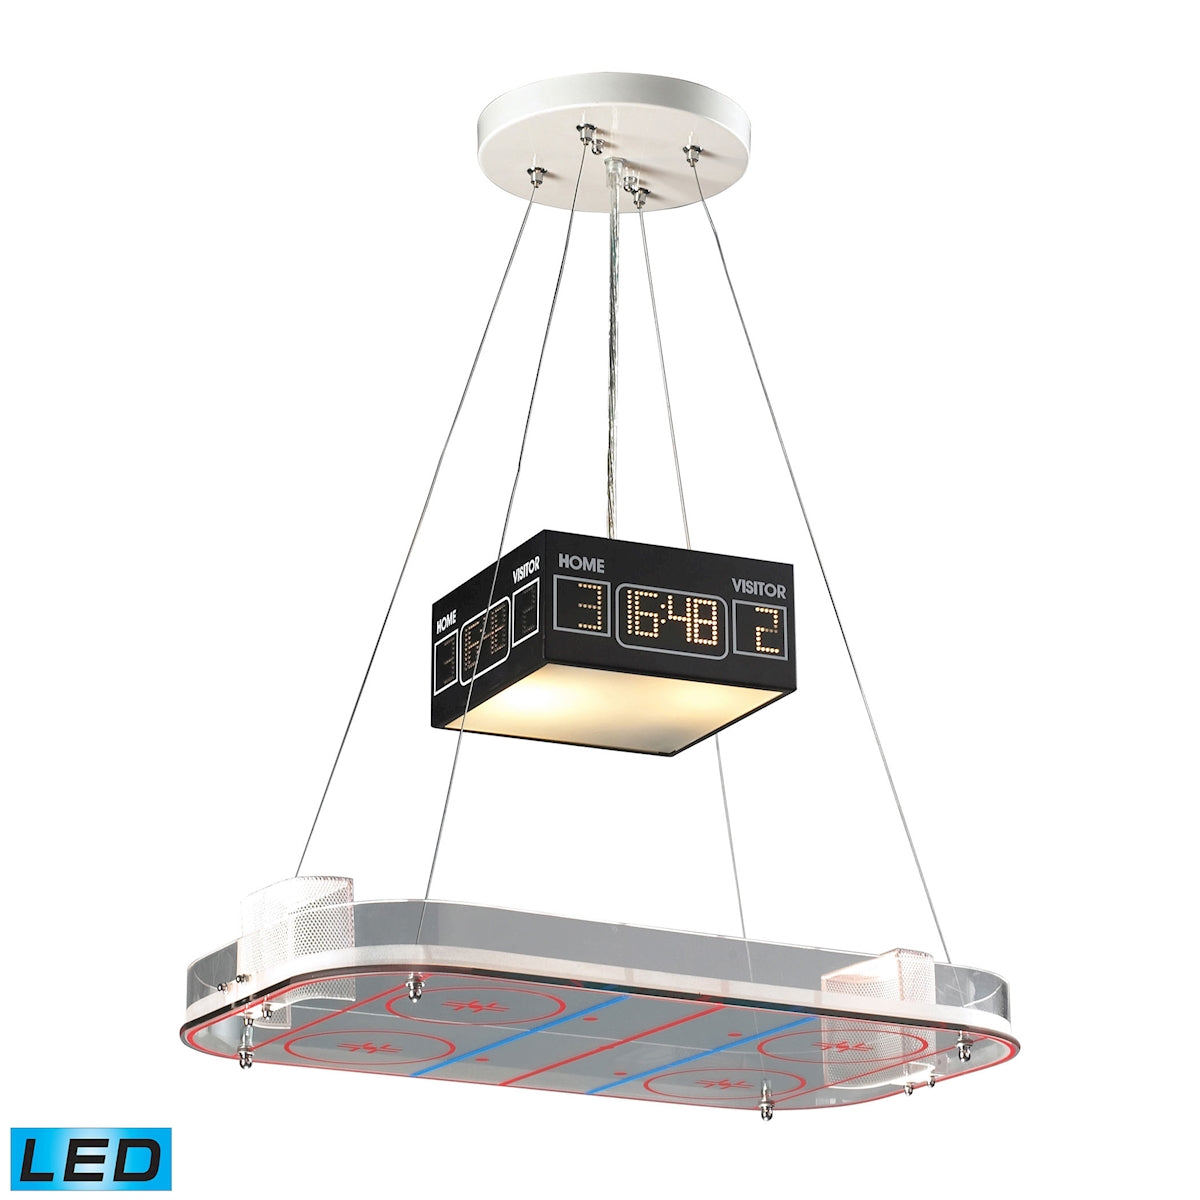 ELK Lighting 5138/2-LED Novelty 2-Light Island Light in Silver with Hockey Arena Motif - Includes LED Bulbs